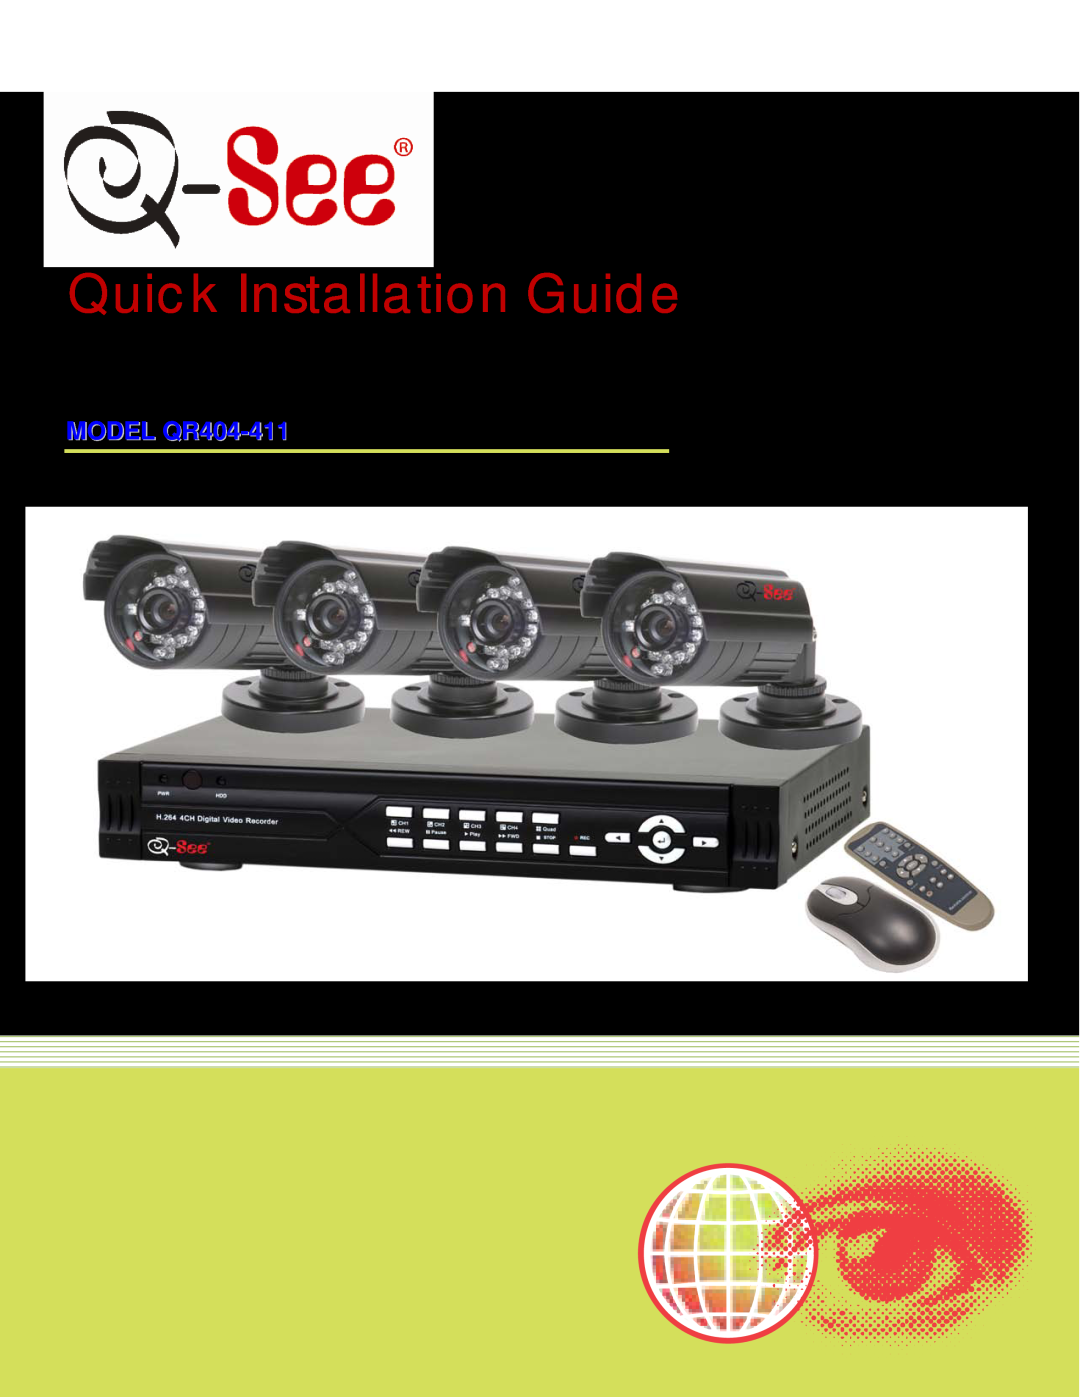 Q-See qr404-411 manual Quick Installation Guide, Channel H.264 Compression DVR with CIF Real-Time Recording and 